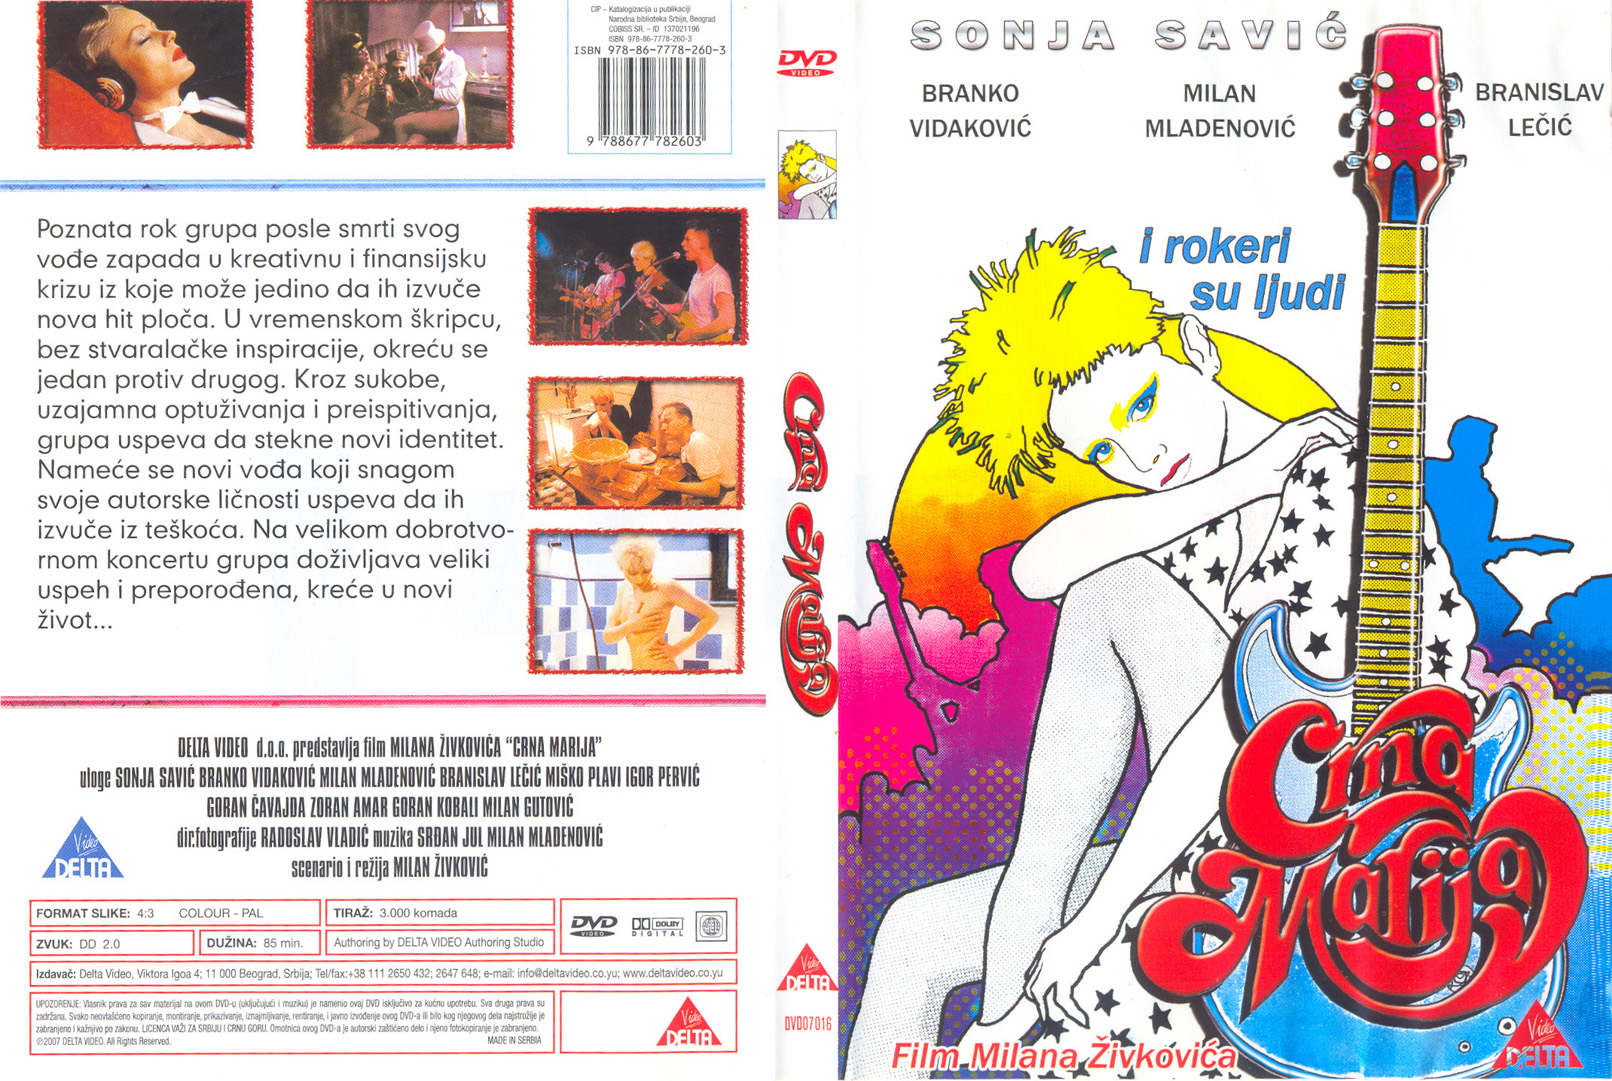 Click to view full size image -  DVD Cover - I - i_rokeri_su_ljudi_dvd - i_rokeri_su_ljudi_dvd.jpg